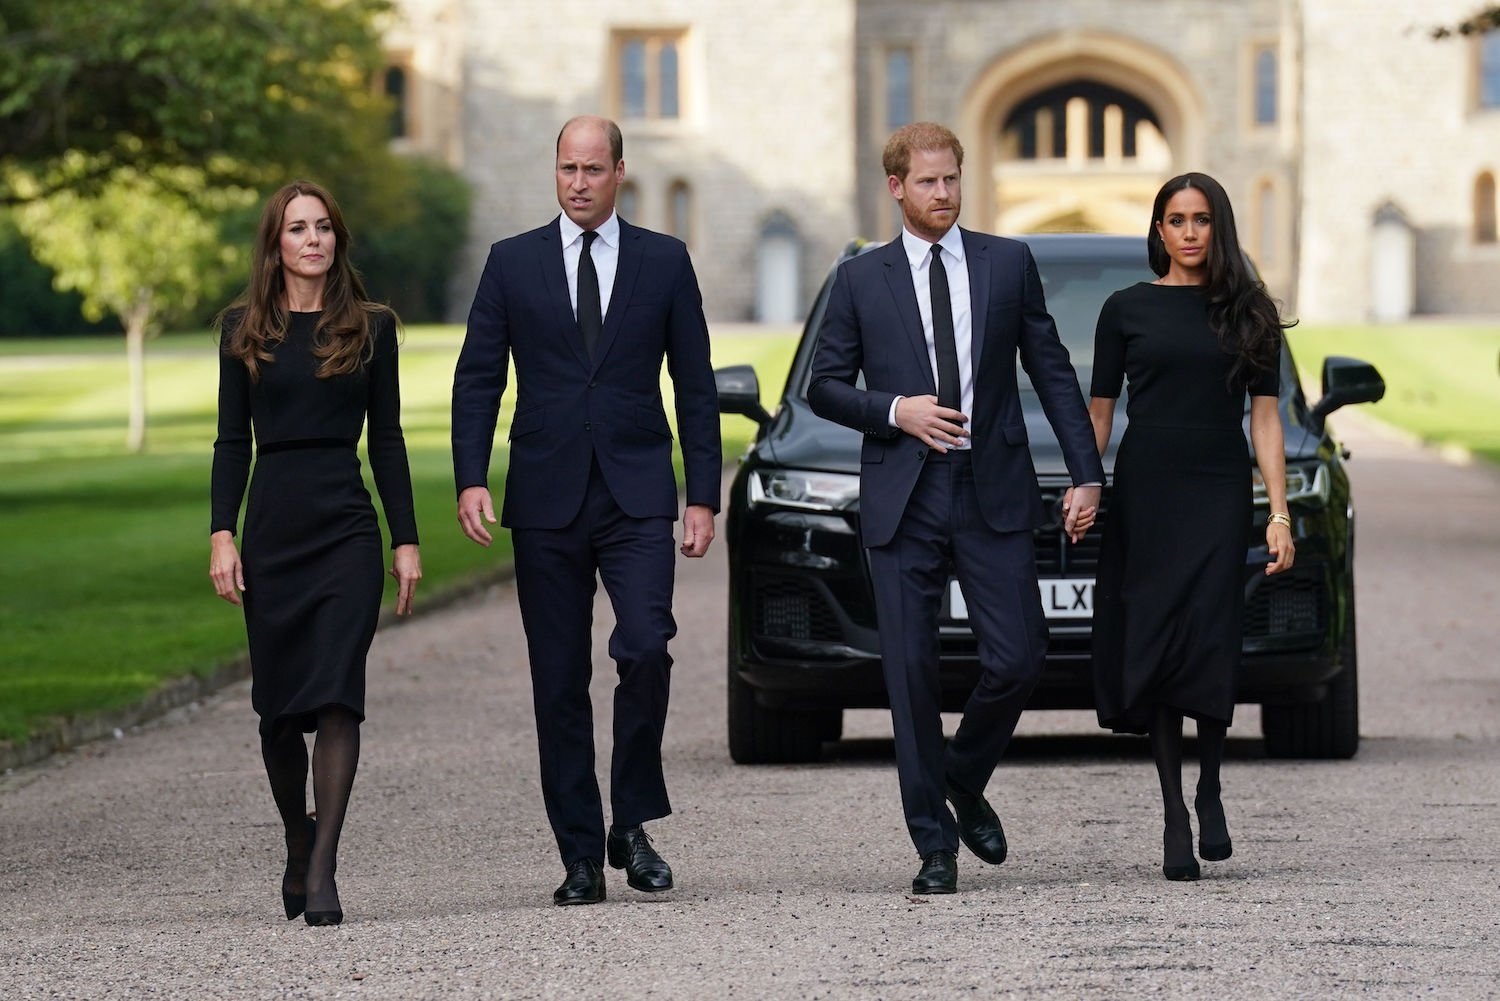 Prince William and Kate Middleton body language business like and Prince Harry and Meghan Markle touchy-feely during Windsor Castle appearance